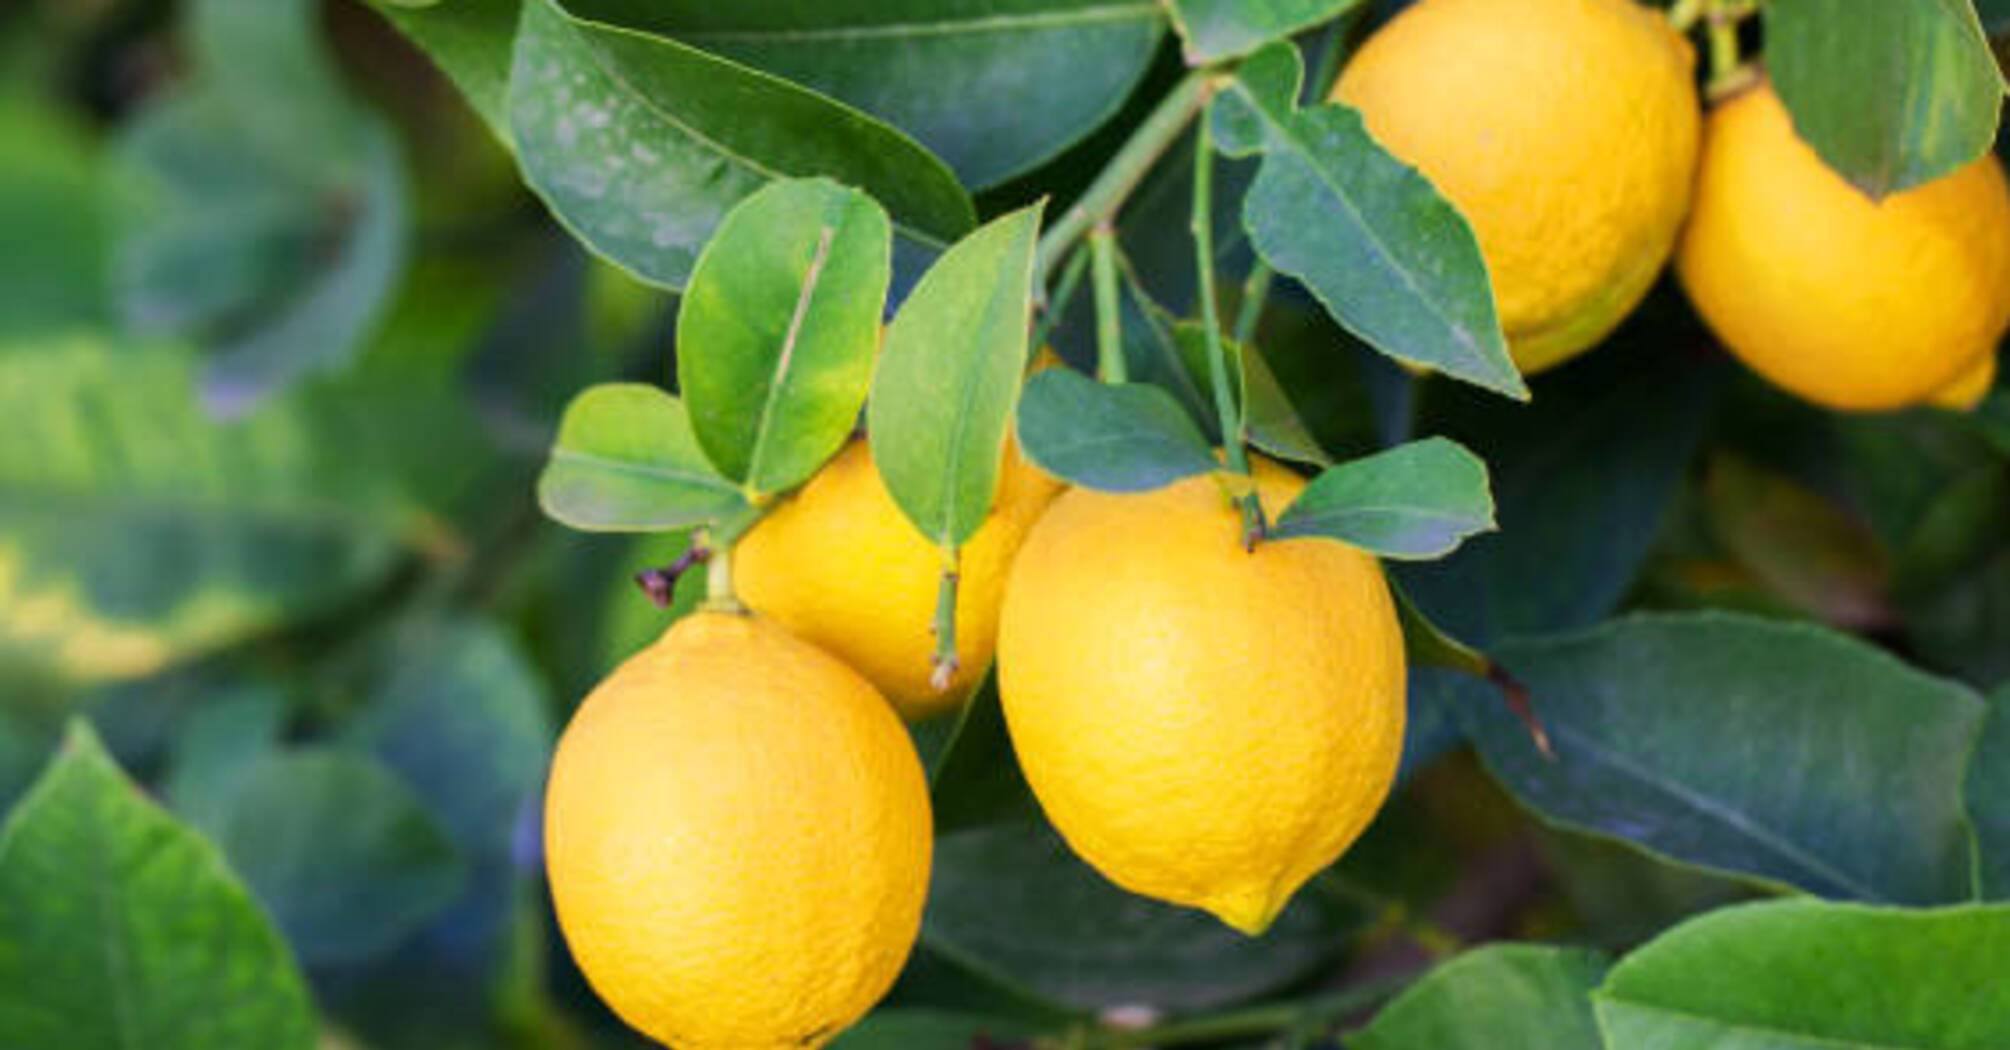 How lemon can help in everyday life: 3 effective life hacks